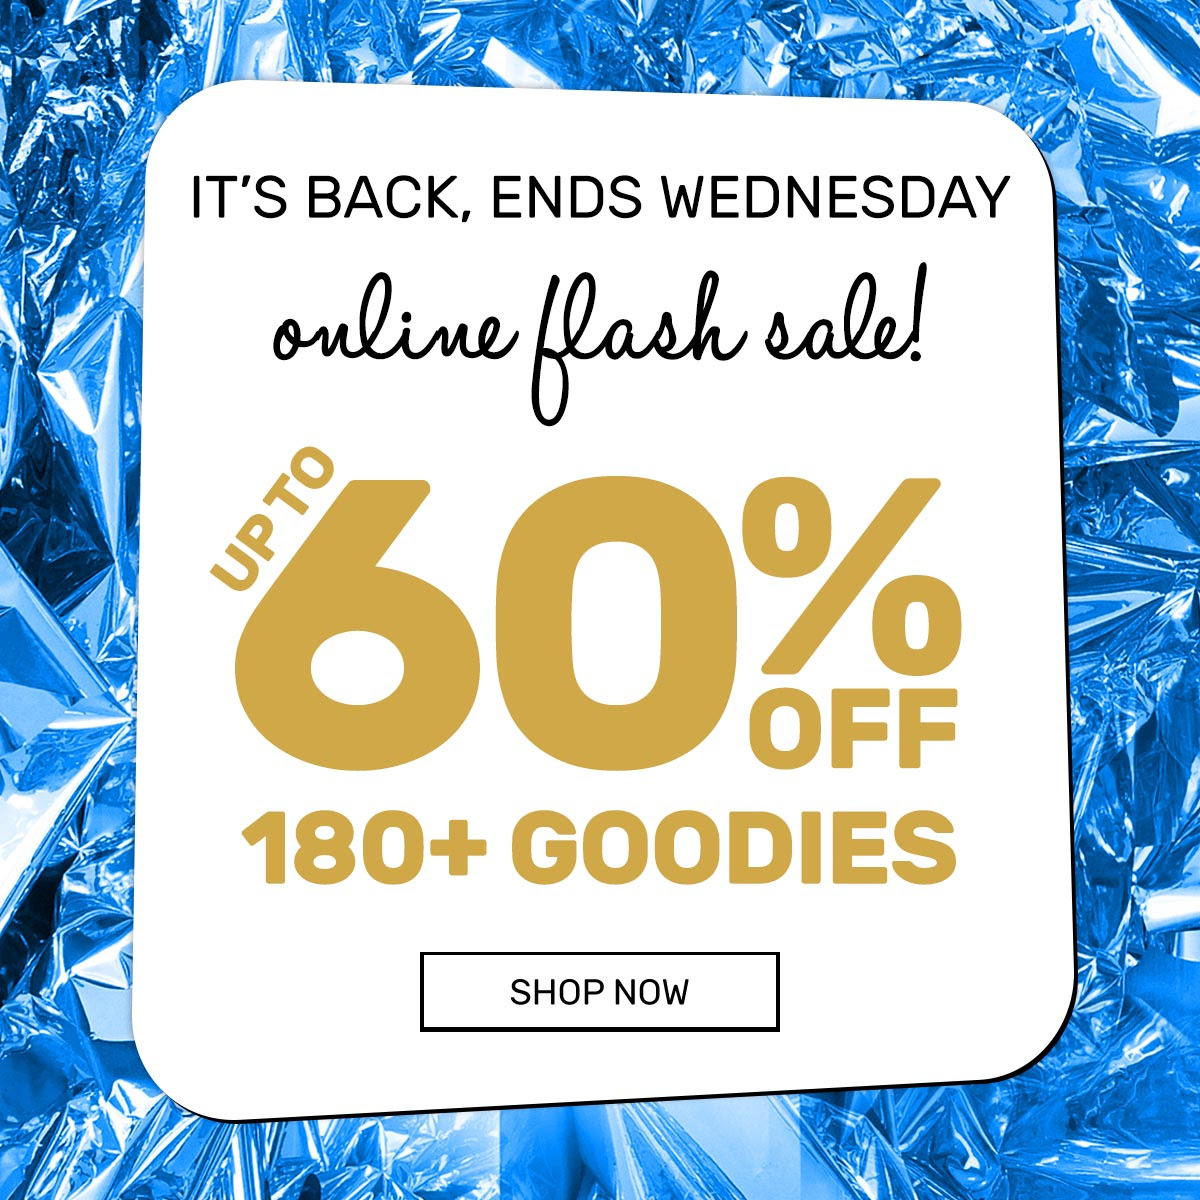 Up to 60% off Selected Goodies